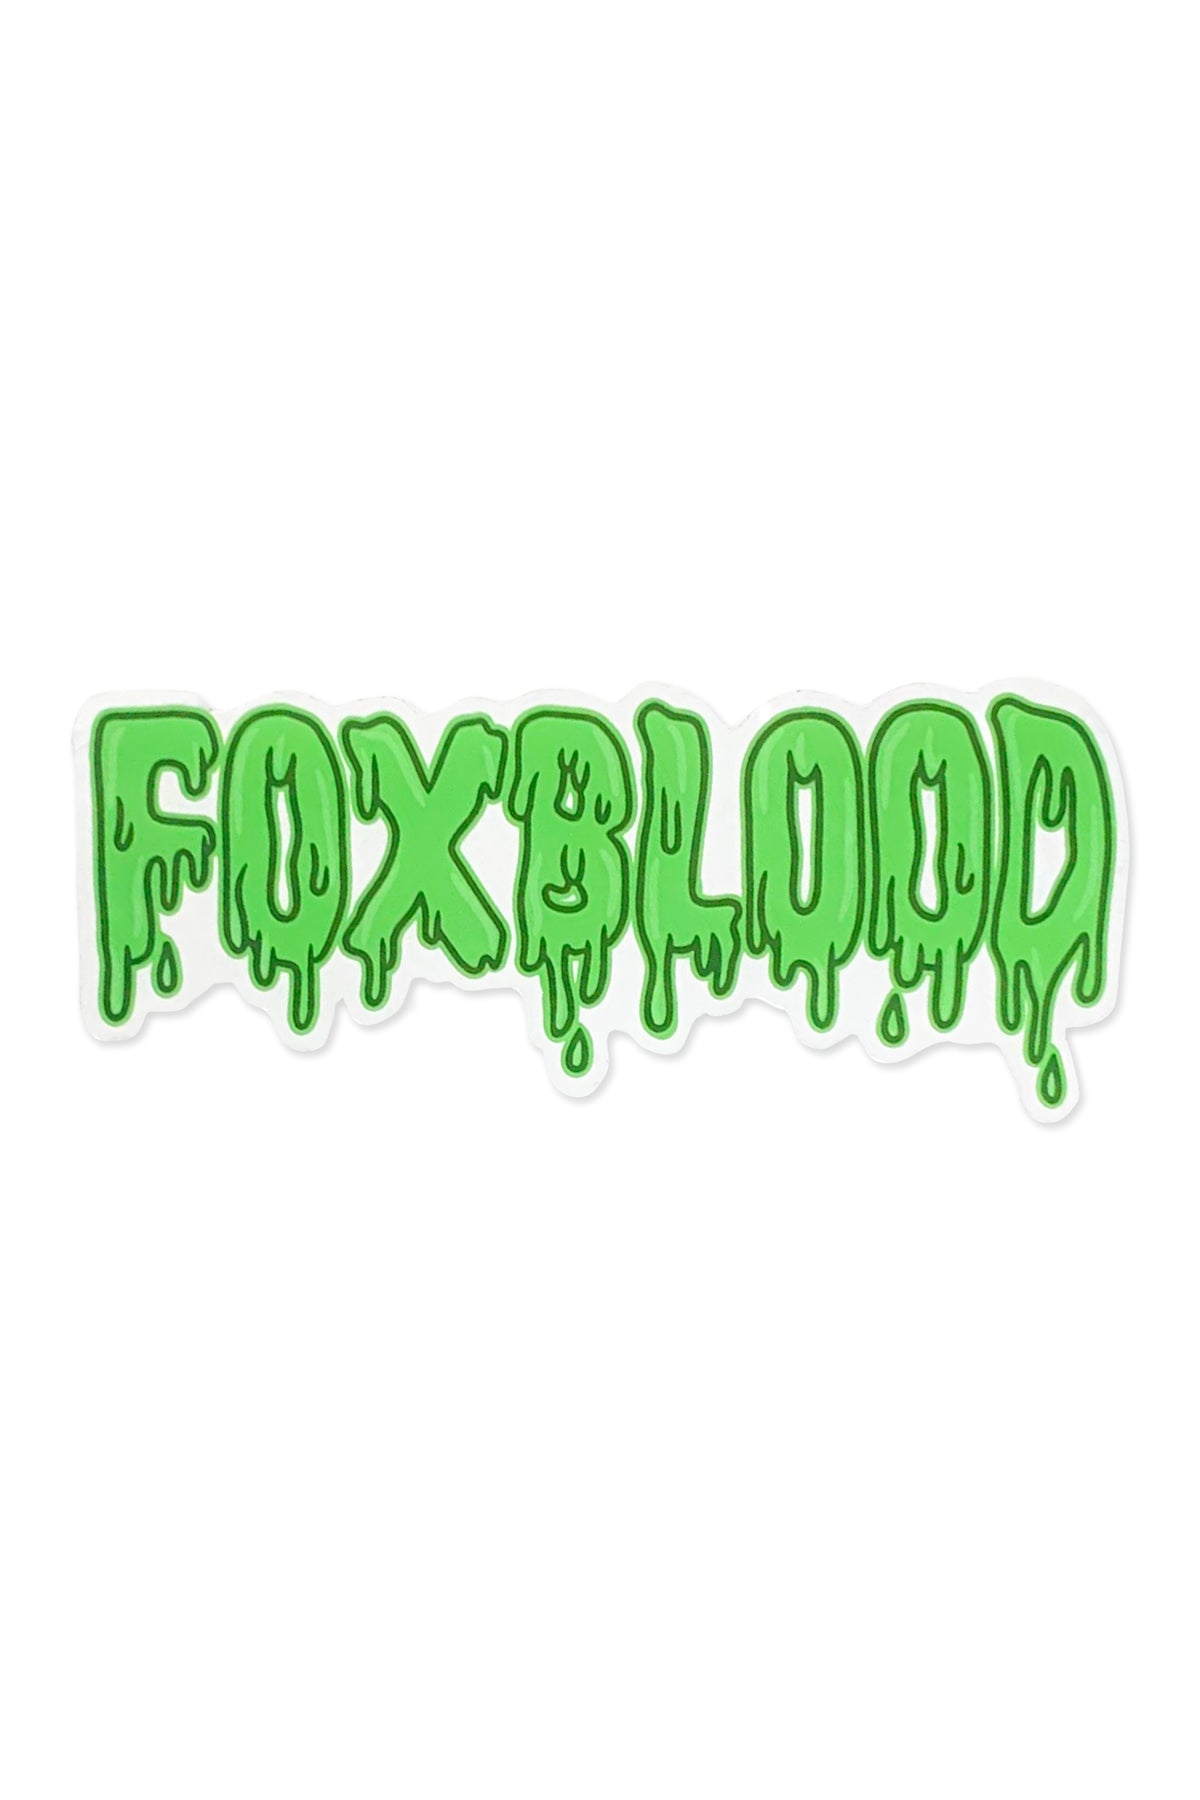 sticker with foxblood text logo in green slime